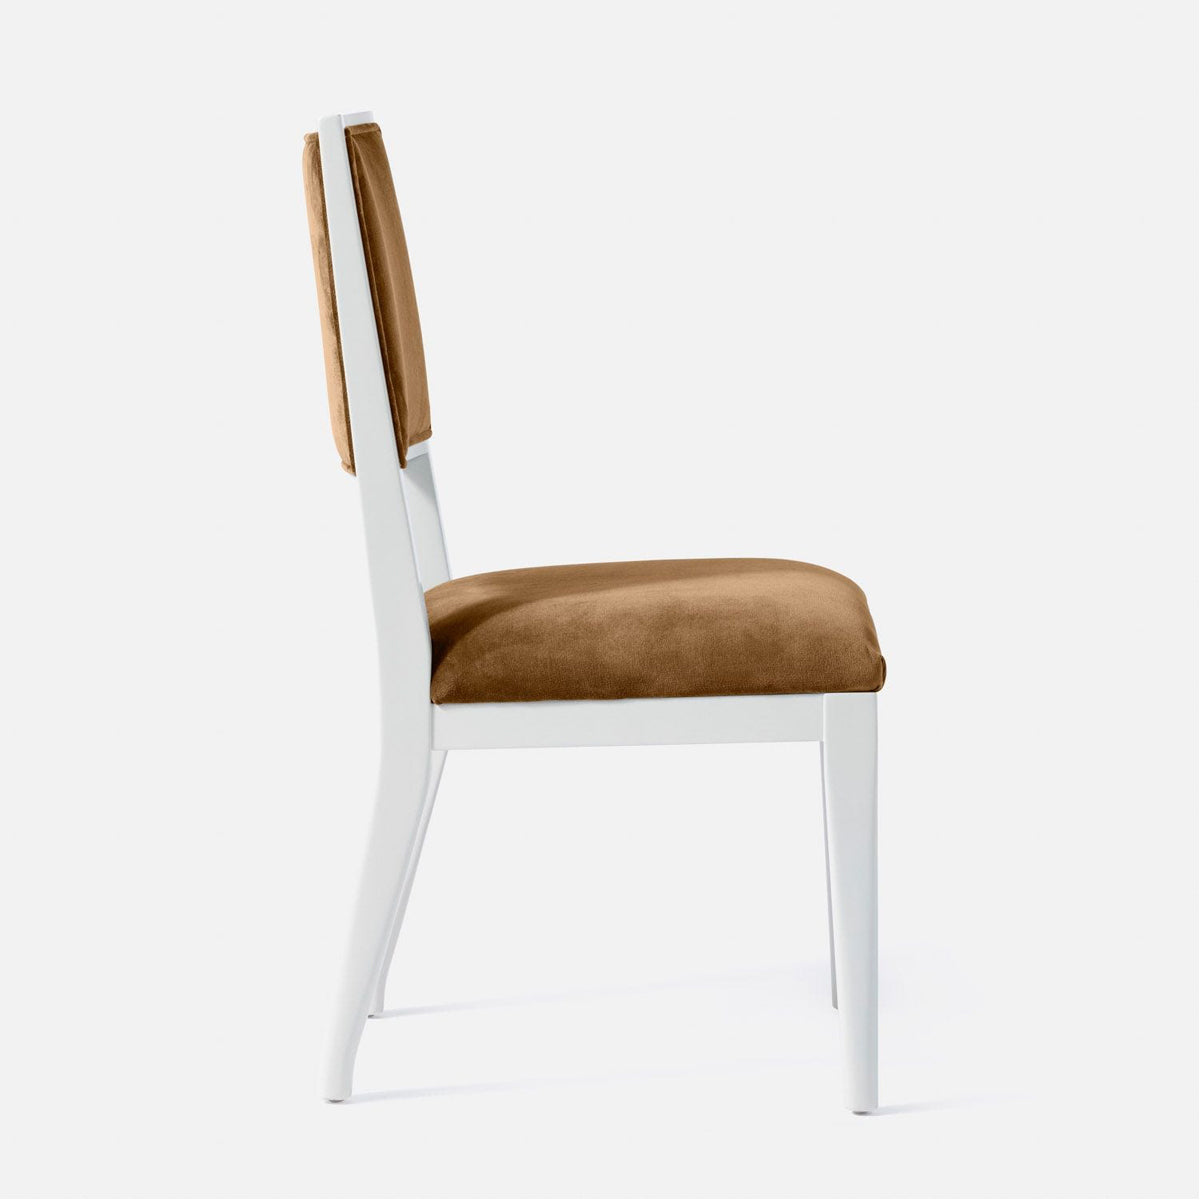 Made Goods Nelton Upholstered Dining Chair in Klein Rayon/Cotton